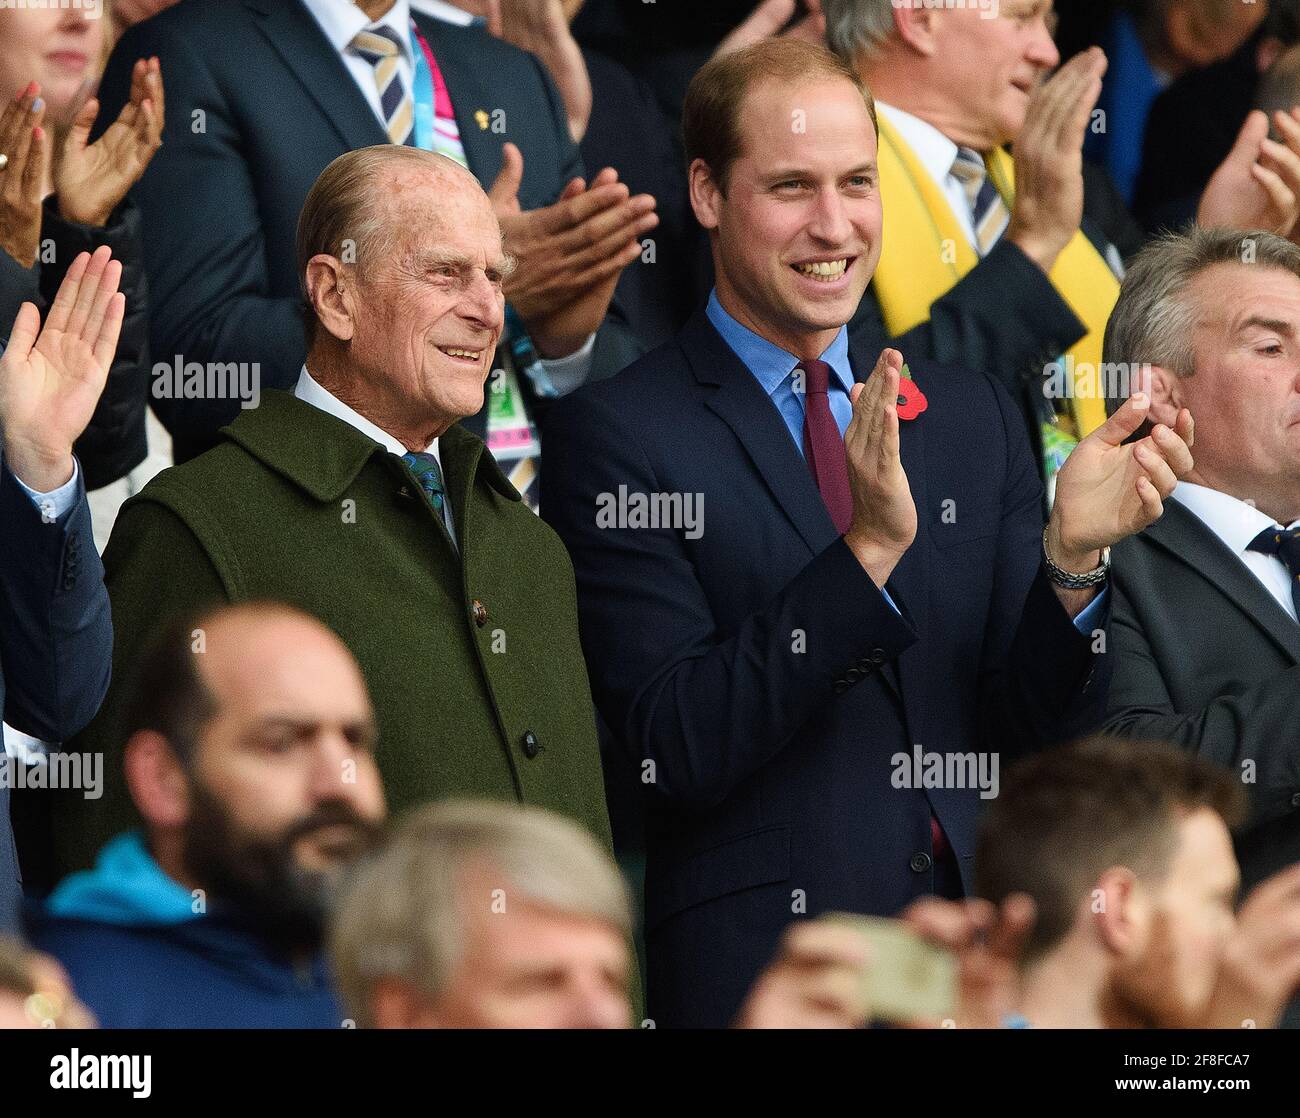 Prince Phillip The Duke Of Edinburgh and Prince William watching the Rugby World Cup Final at Twickenham 2015. Picture : Mark Pain Stock Photo